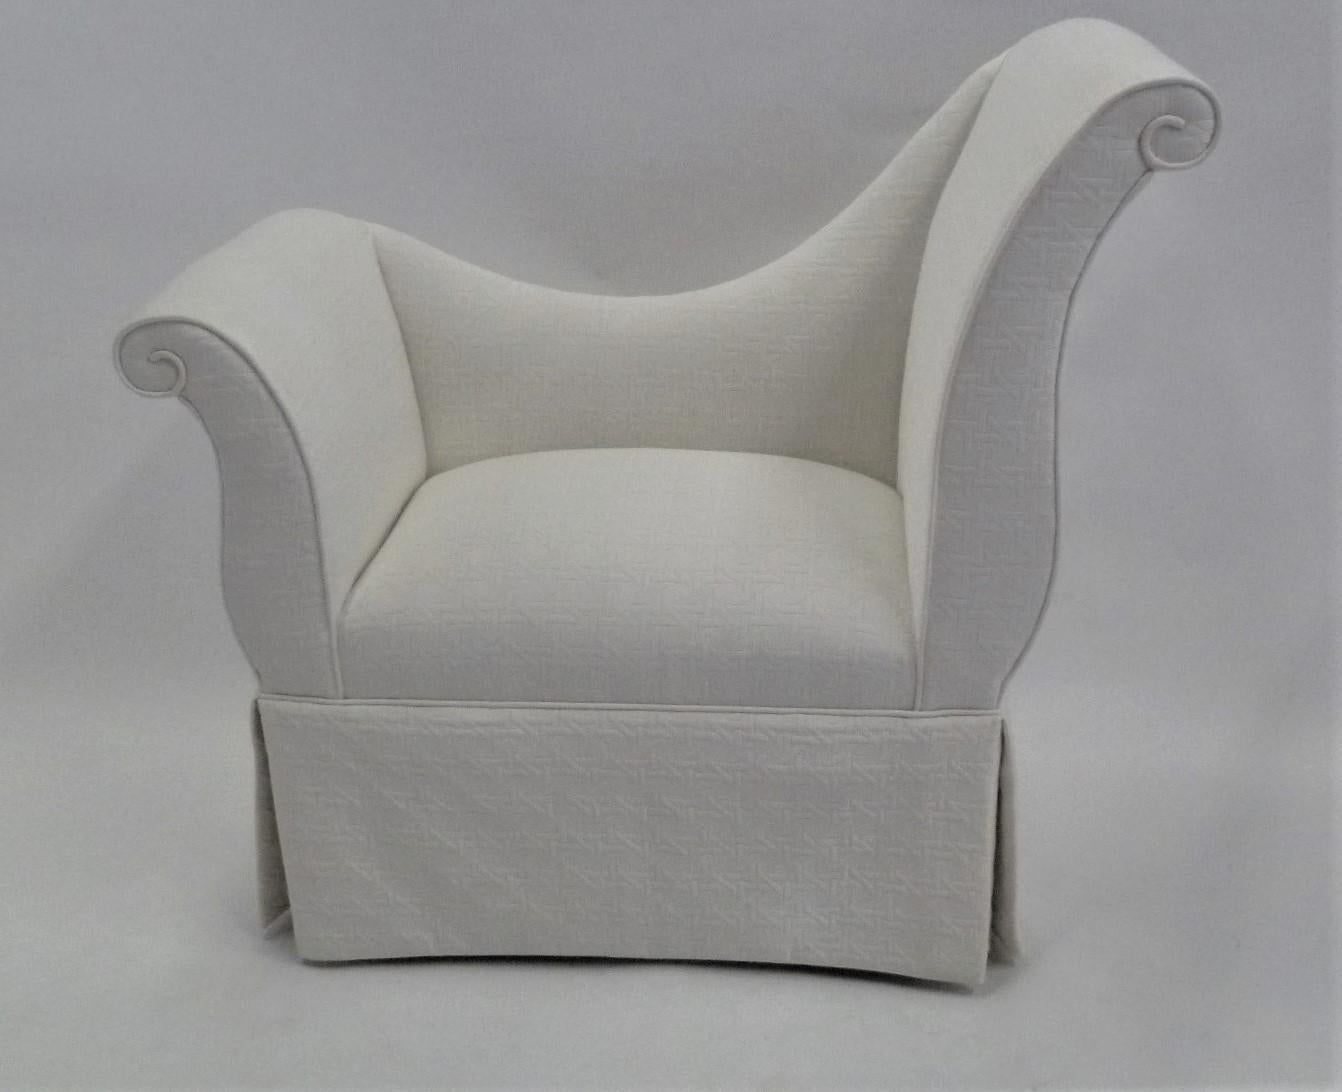 Hollywood Regency glamour for the boudoir or bedroom, off to the side or at the vanity, this delightful chair or bench has curling arms at differing heights and a dressy skirt reminiscent of the films of yesteryear. We can imagine Harlow or Garbo